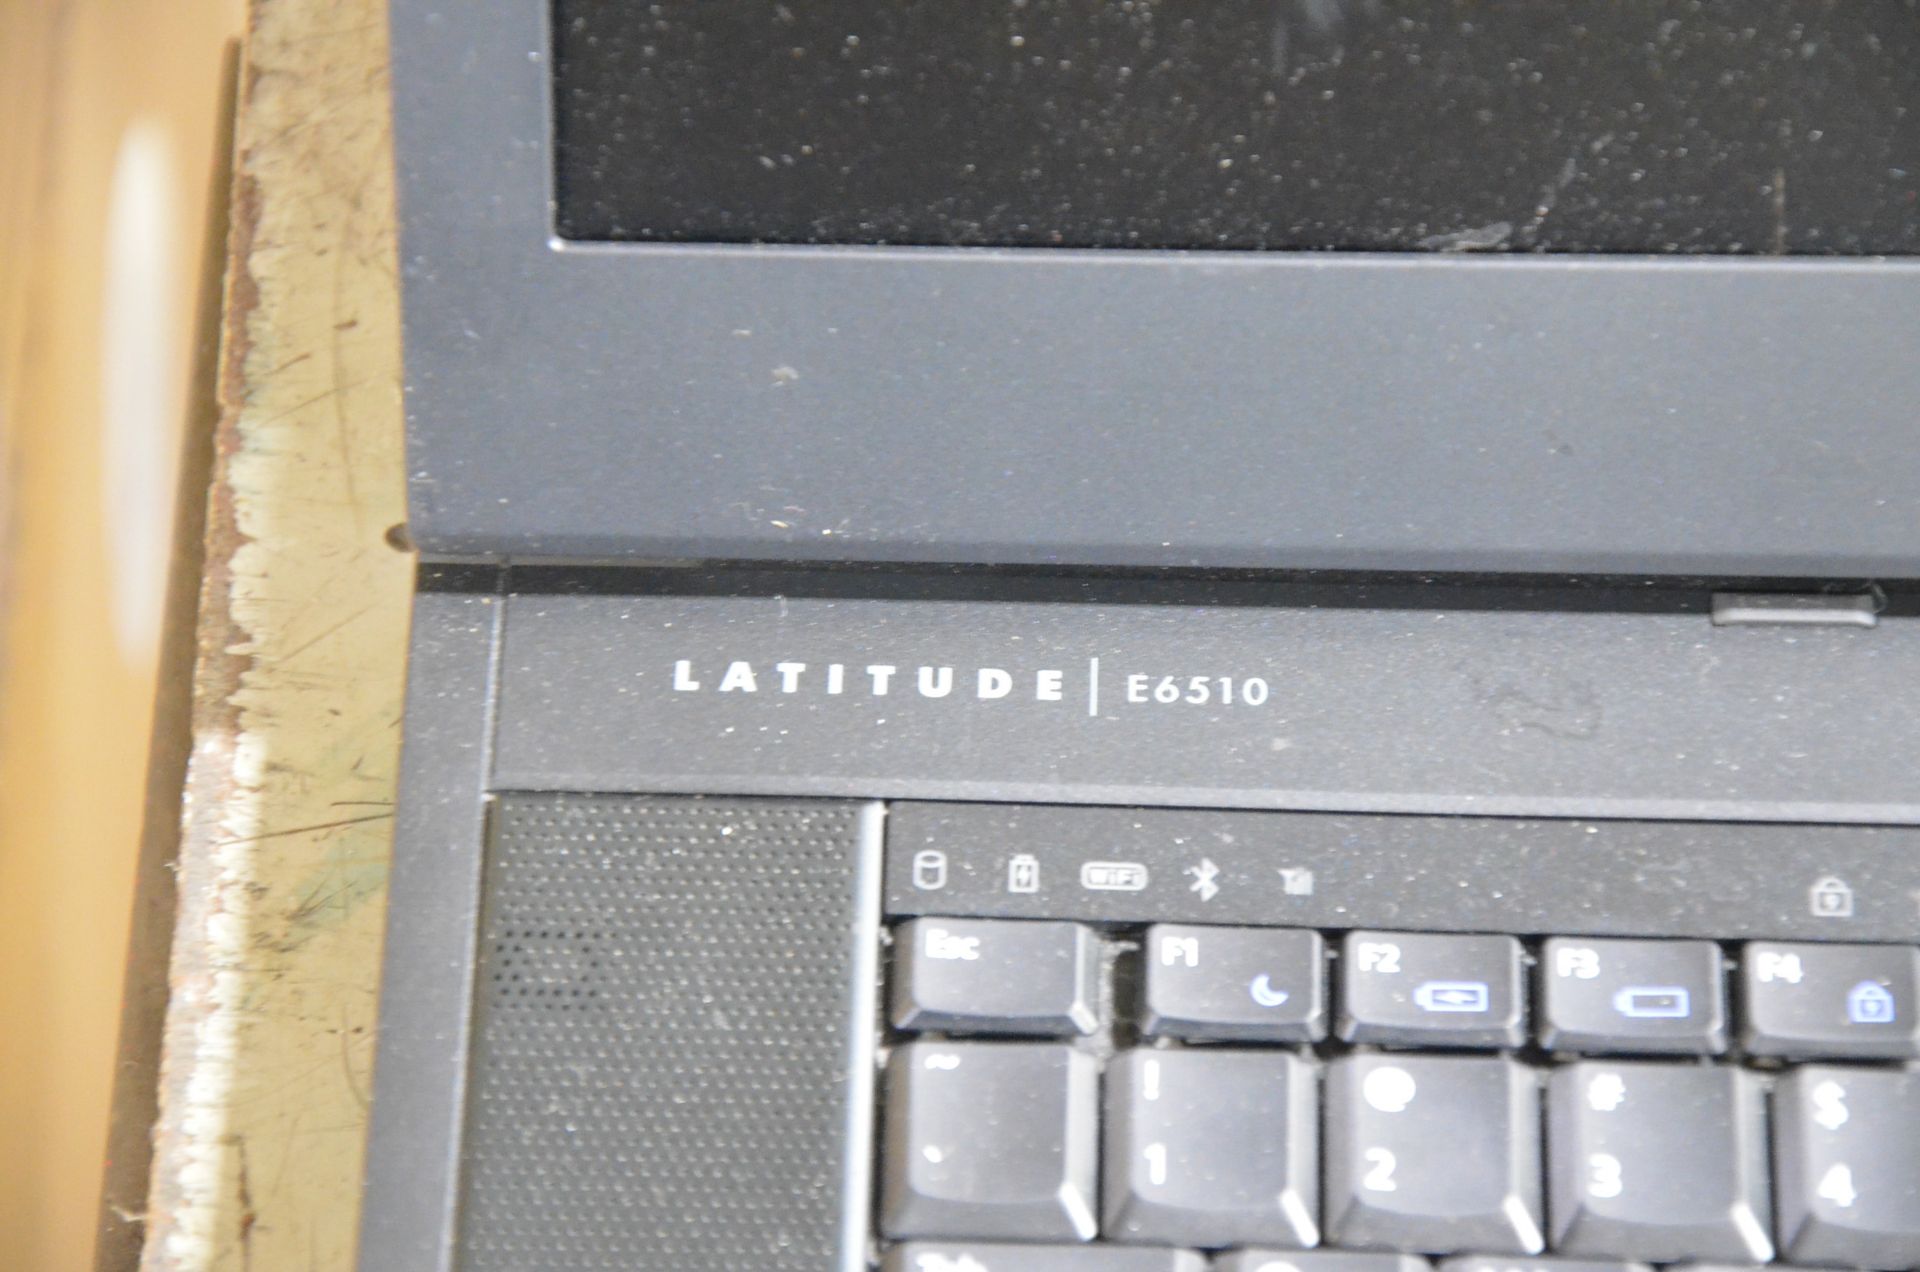 DELL LATITUDE E6510 LAPTOP WITH CORE I5 PROCESSOR, CHARGER AND SPARE BATTERY, S/N N/A [RIGGING FEE - Image 3 of 3